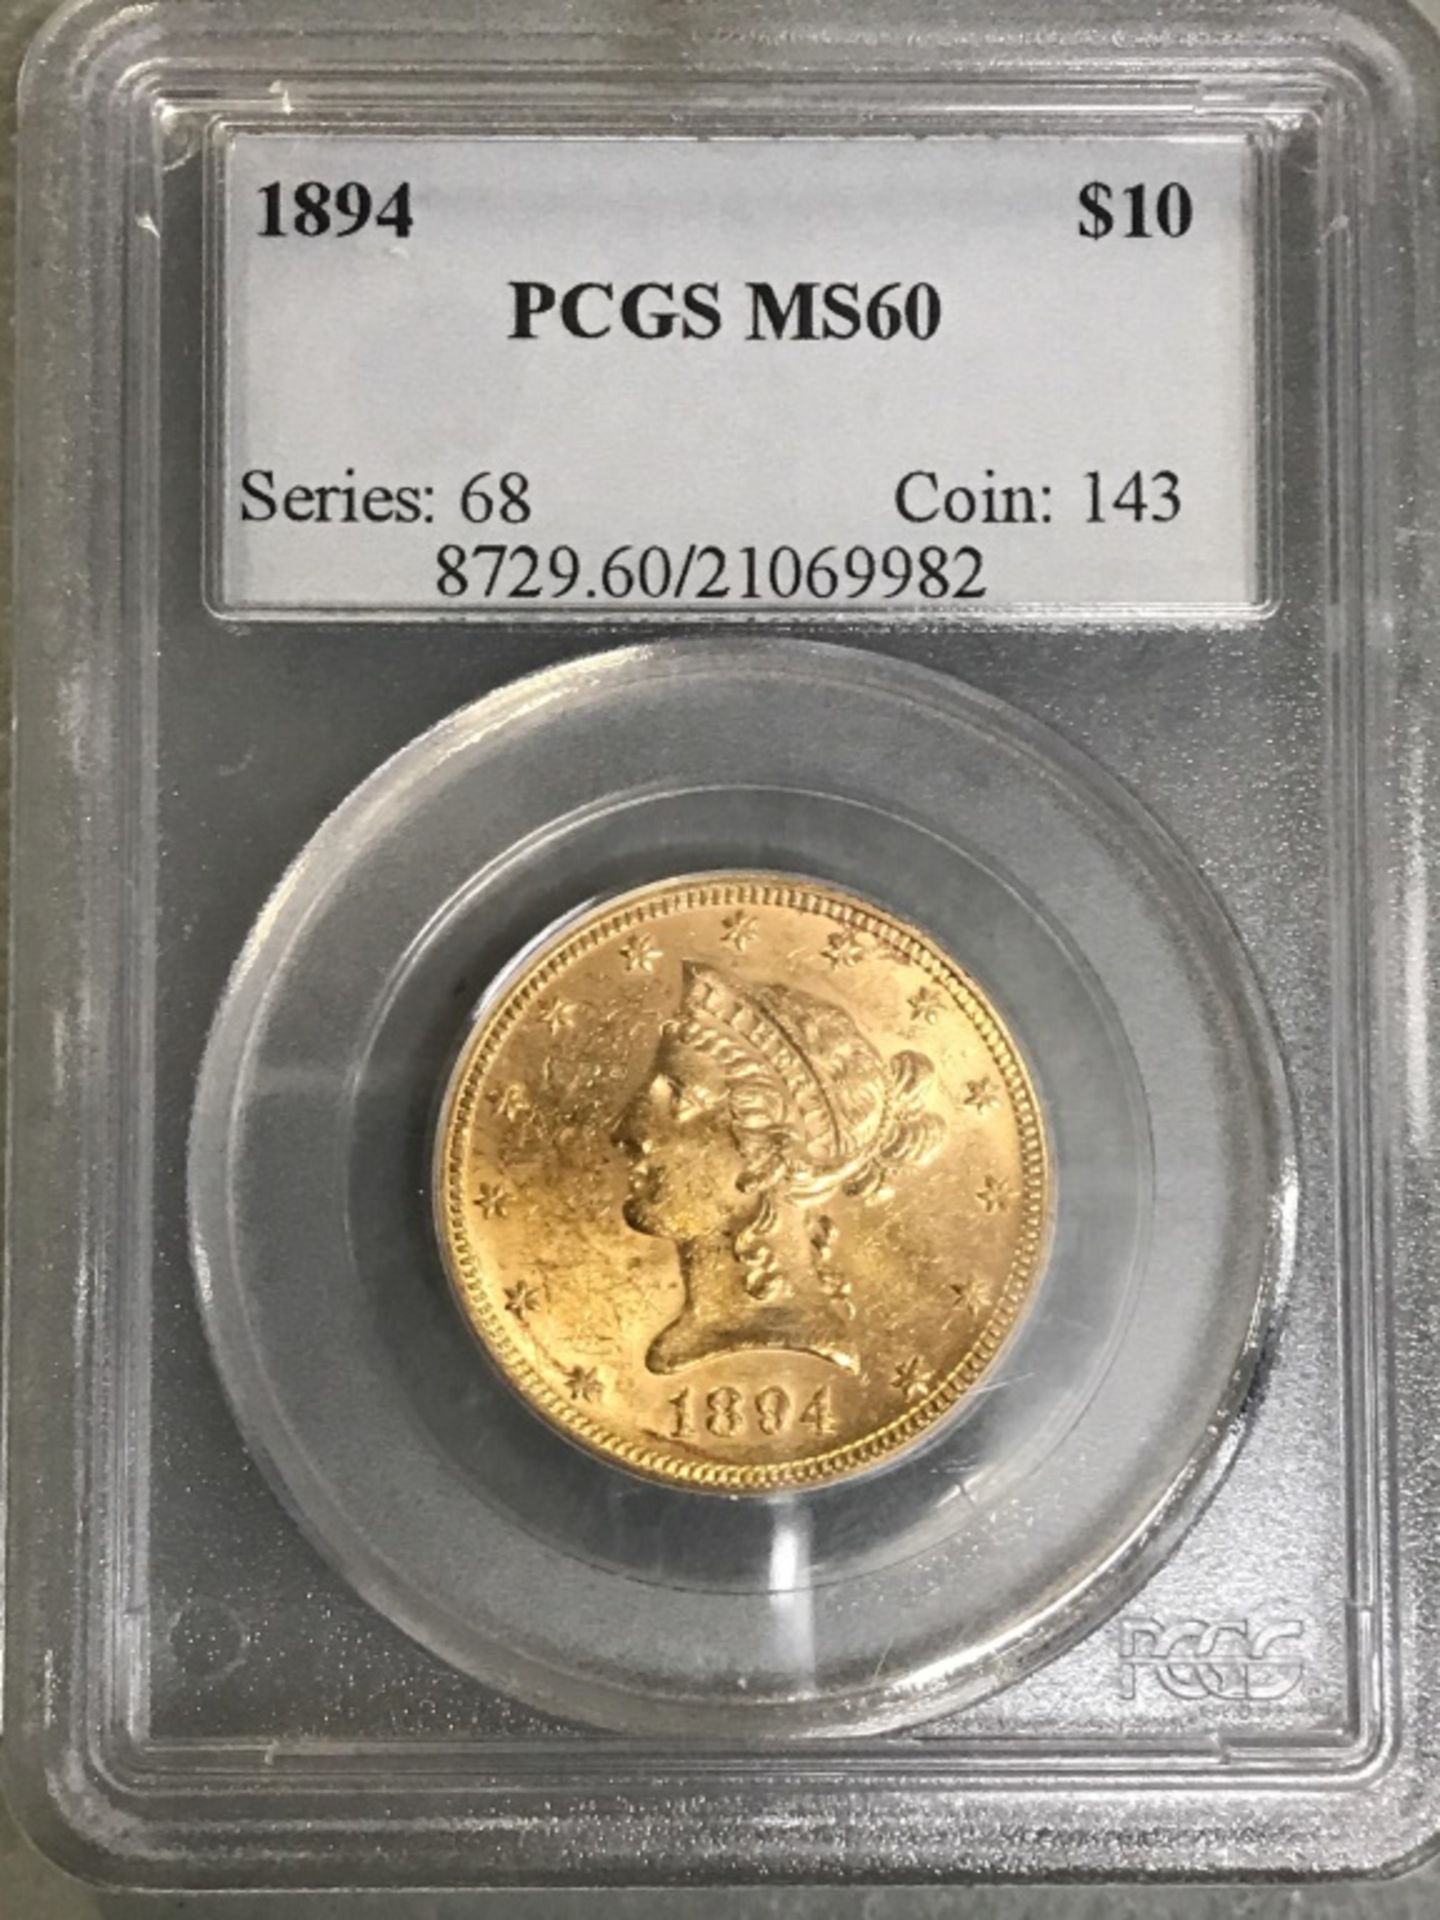 $10 US Gold MS 60 1894 - Image 3 of 9